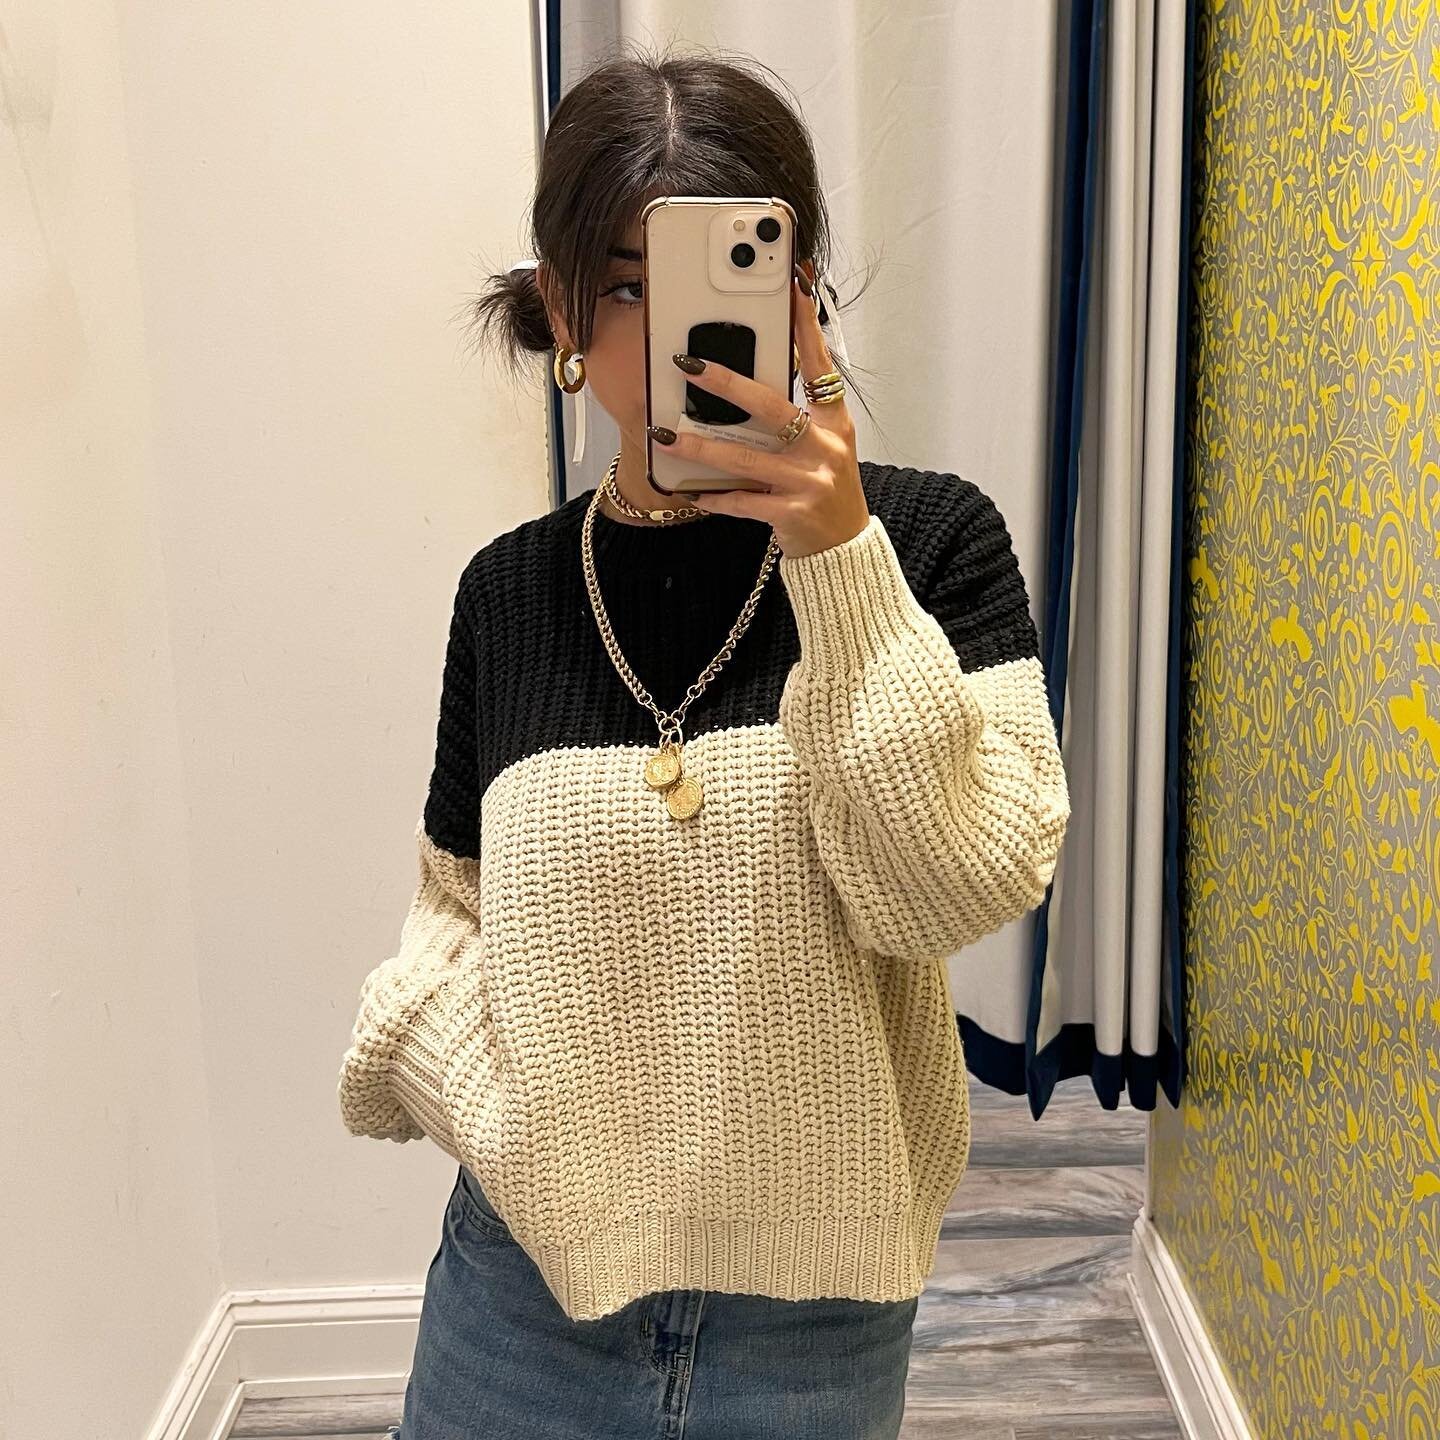 Sweater weather is upon us 🍂 Check out some of new sweaters in stores now!!

DM us to order and follow us to be the first to hear about our new arrivals, sales, giveaways, and more!
.

.

.

#vanillaskystores #shopnow #ootd #fashioninspo #outfitinsp